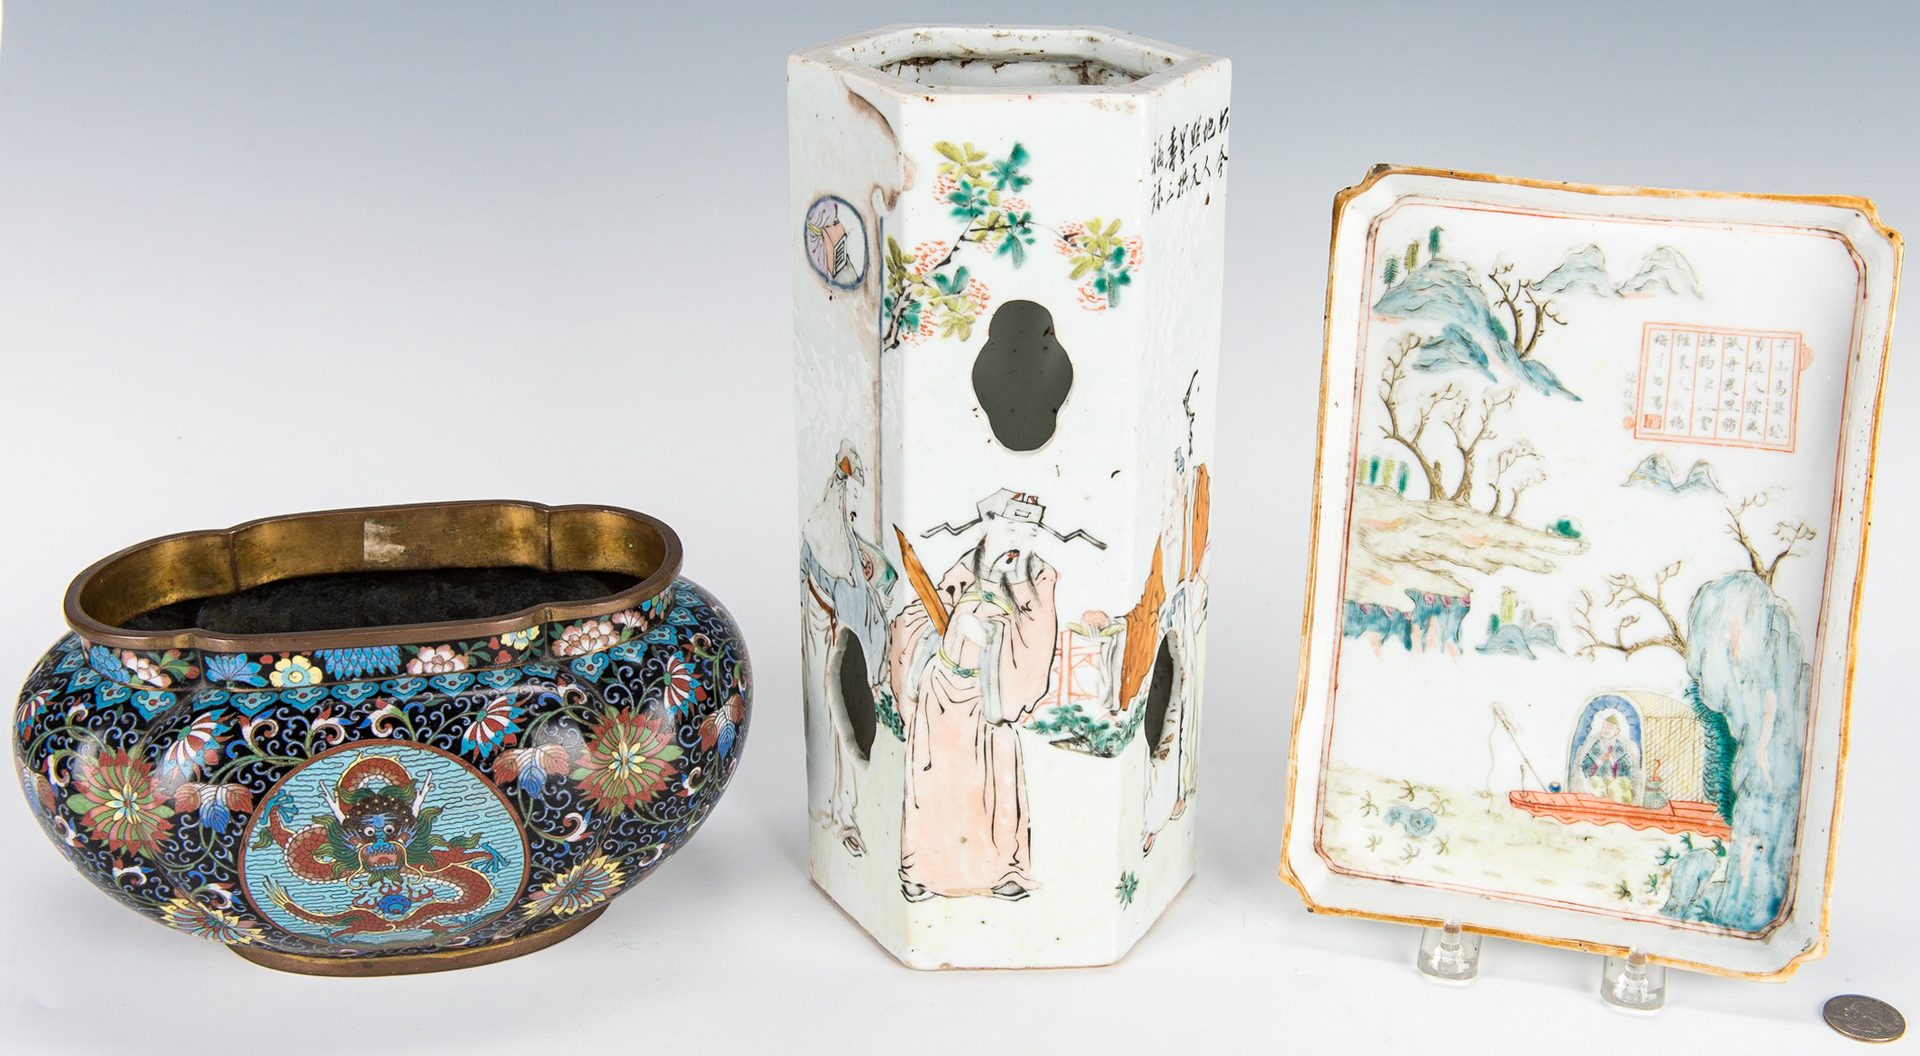 Lot 16: Cloisonne Lobed Bulb Pot, Famille Rose Tray and Hat Stand with Poem